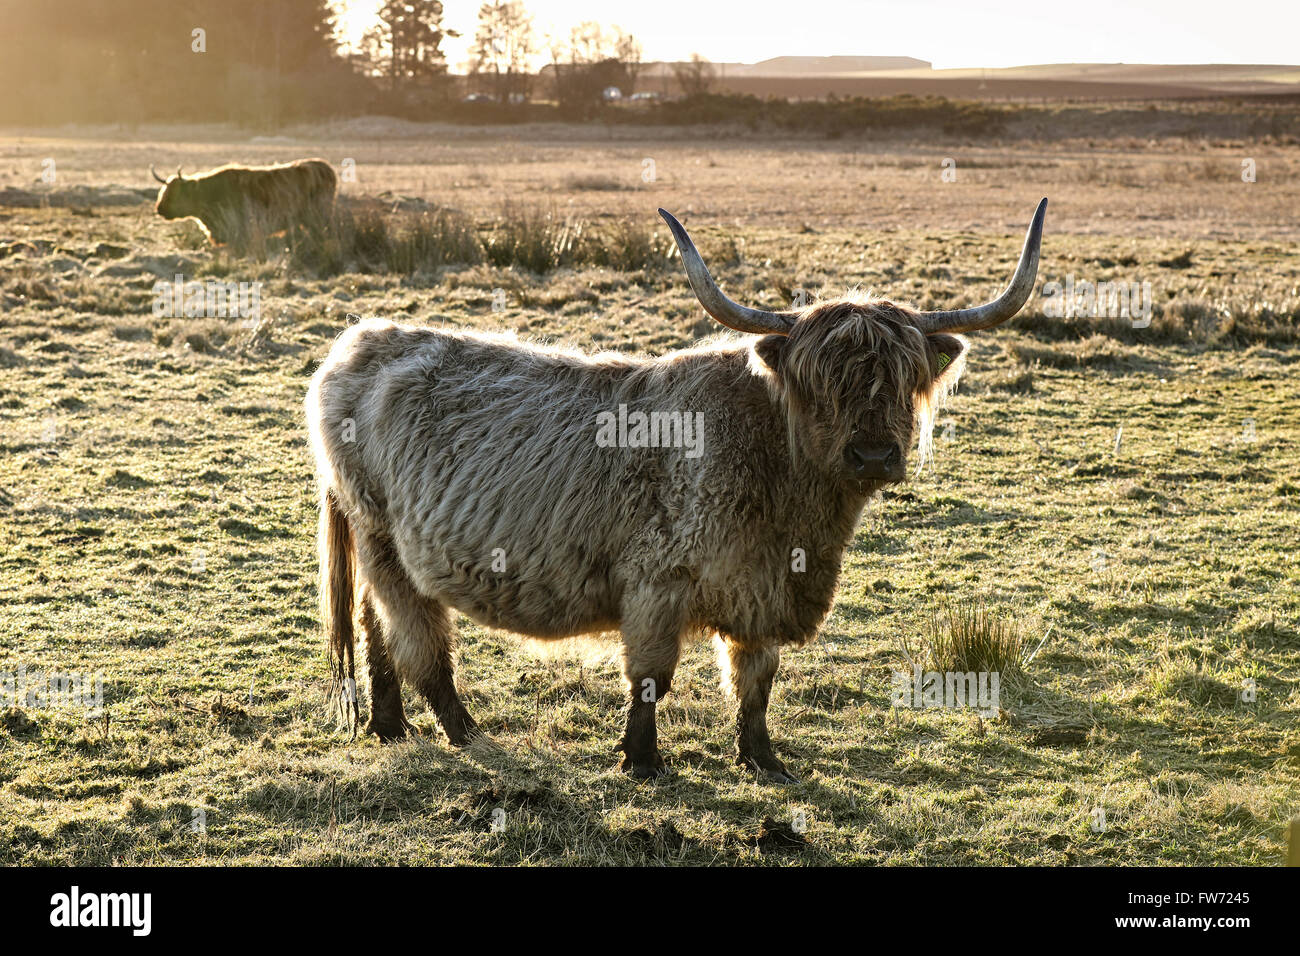 Highland cows are a Scottish cattle breed. Here backlit at dawn in a Scottish Field. Stock Photo